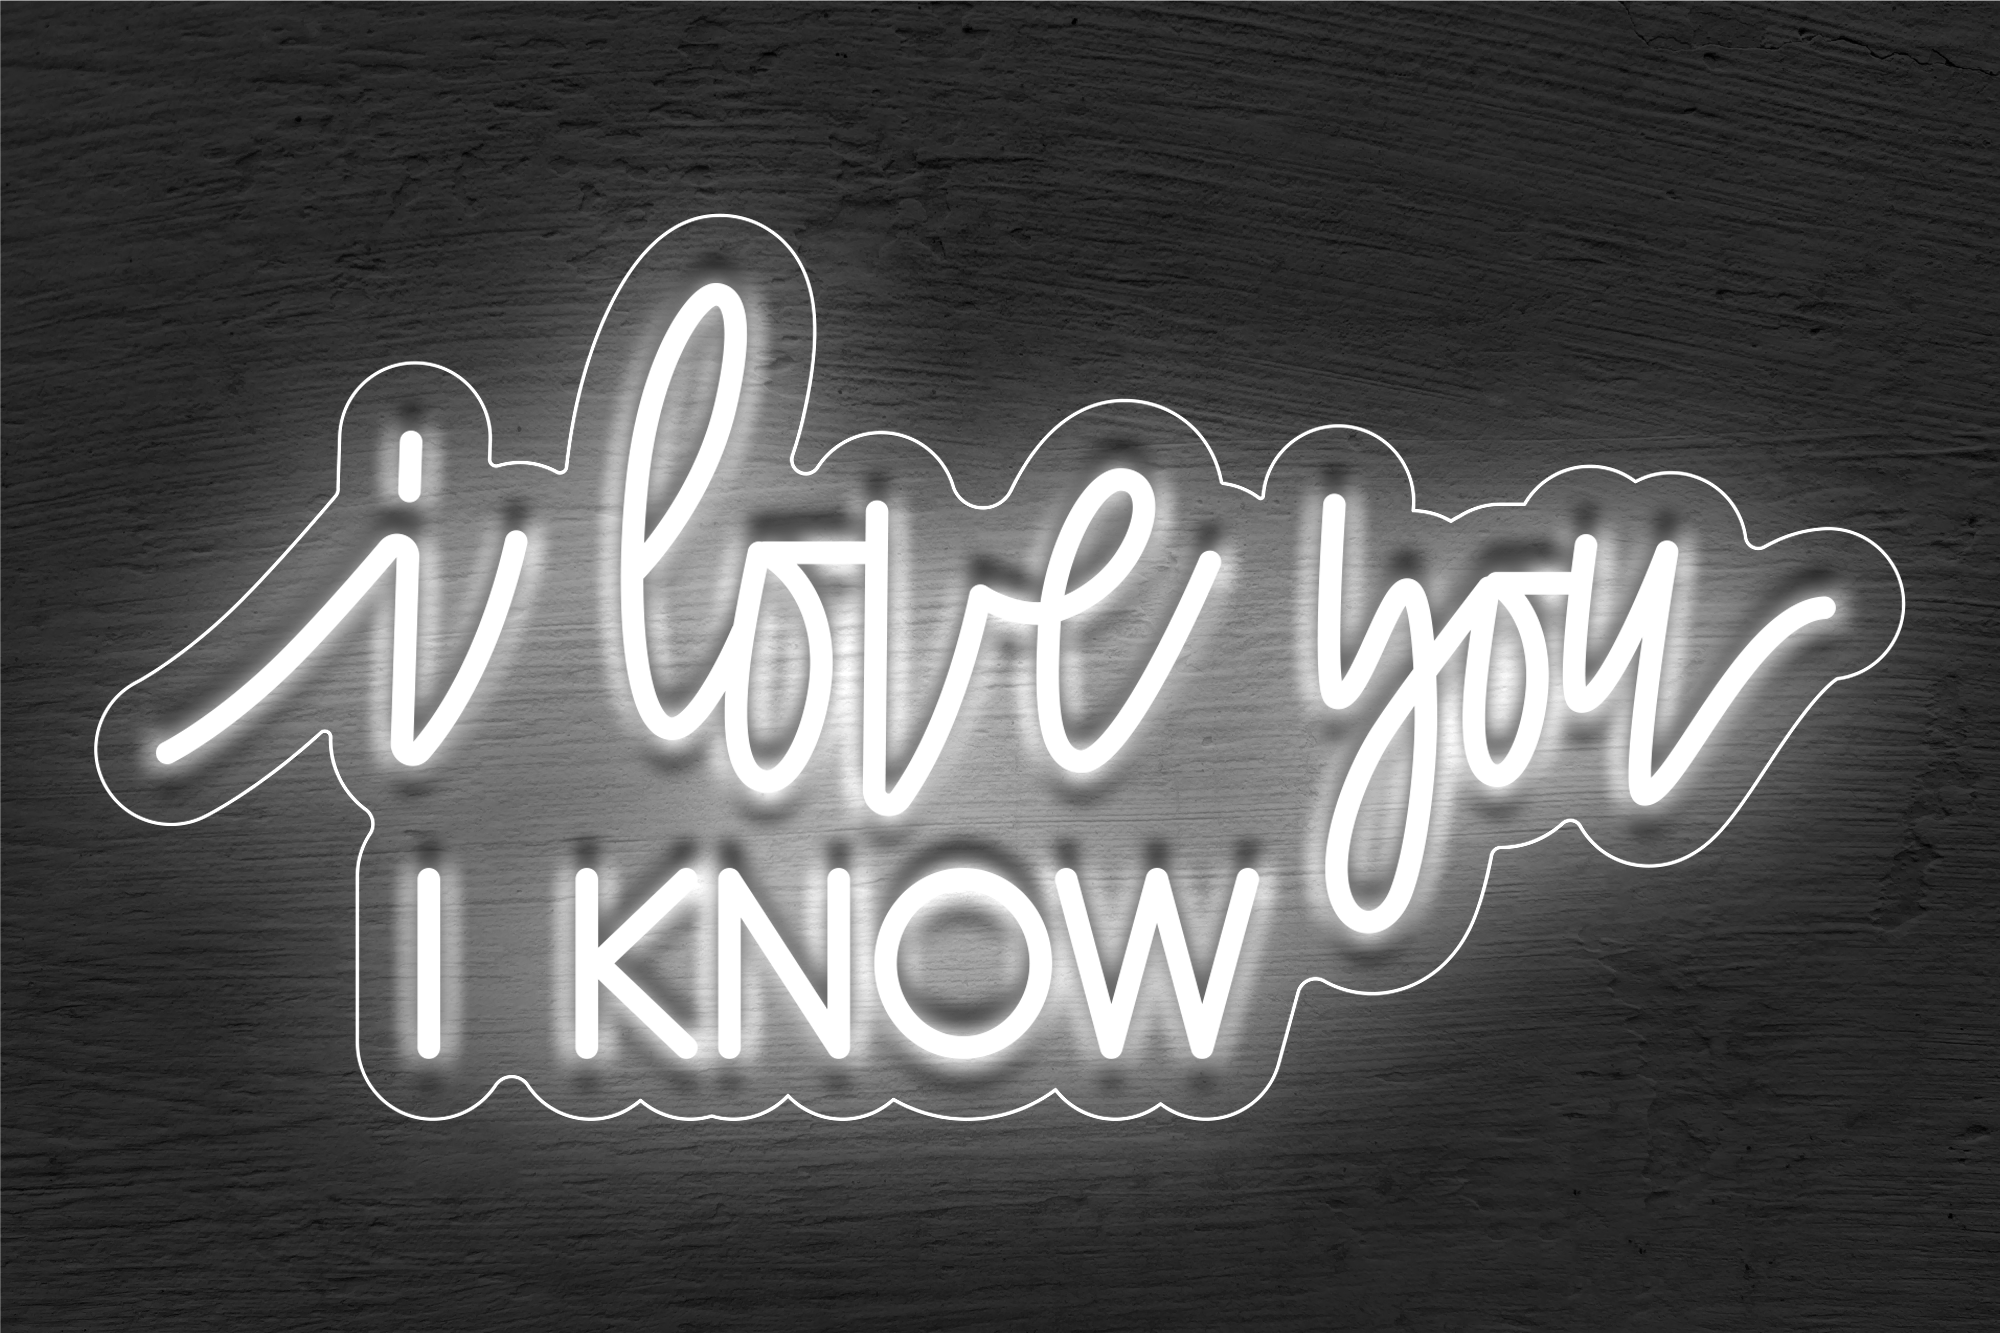 "I love you I KNOW" LED Neon Sign